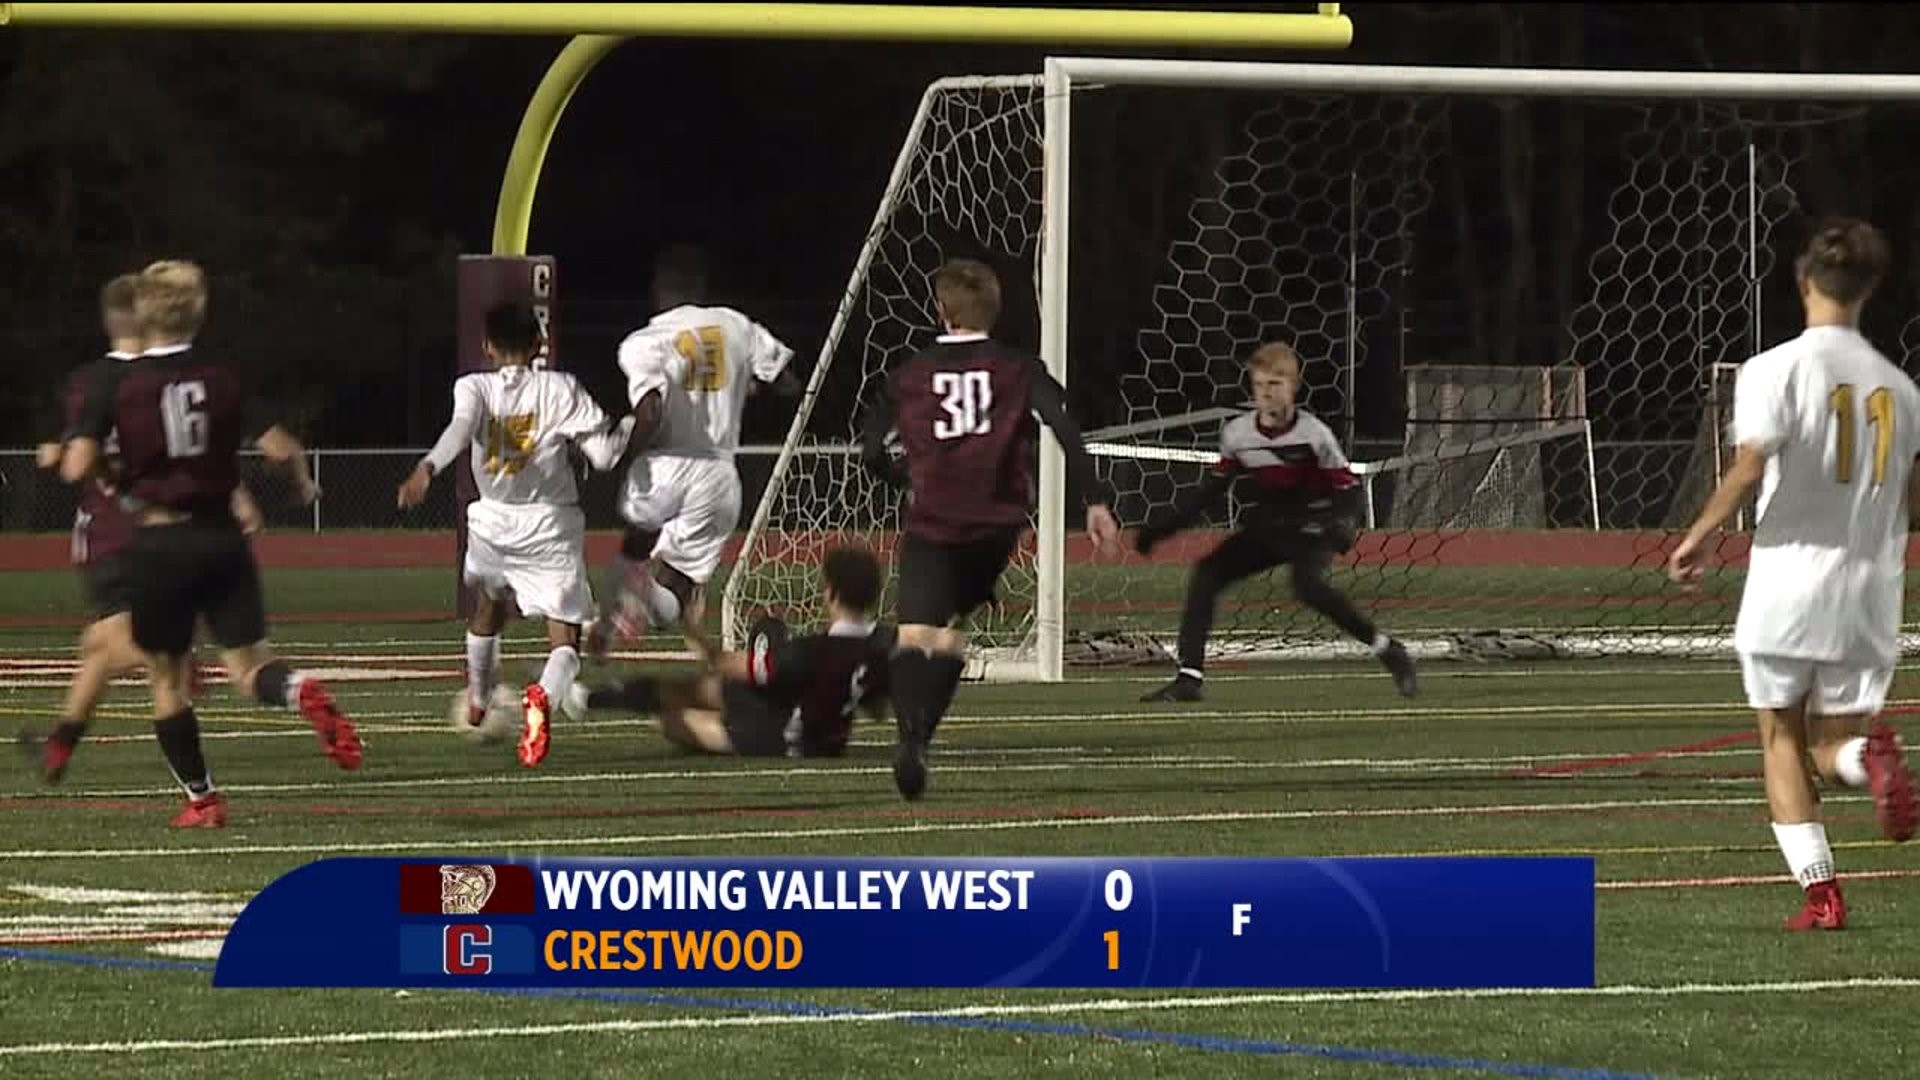 Crestwood vs Wyoming Valley West boys soccer